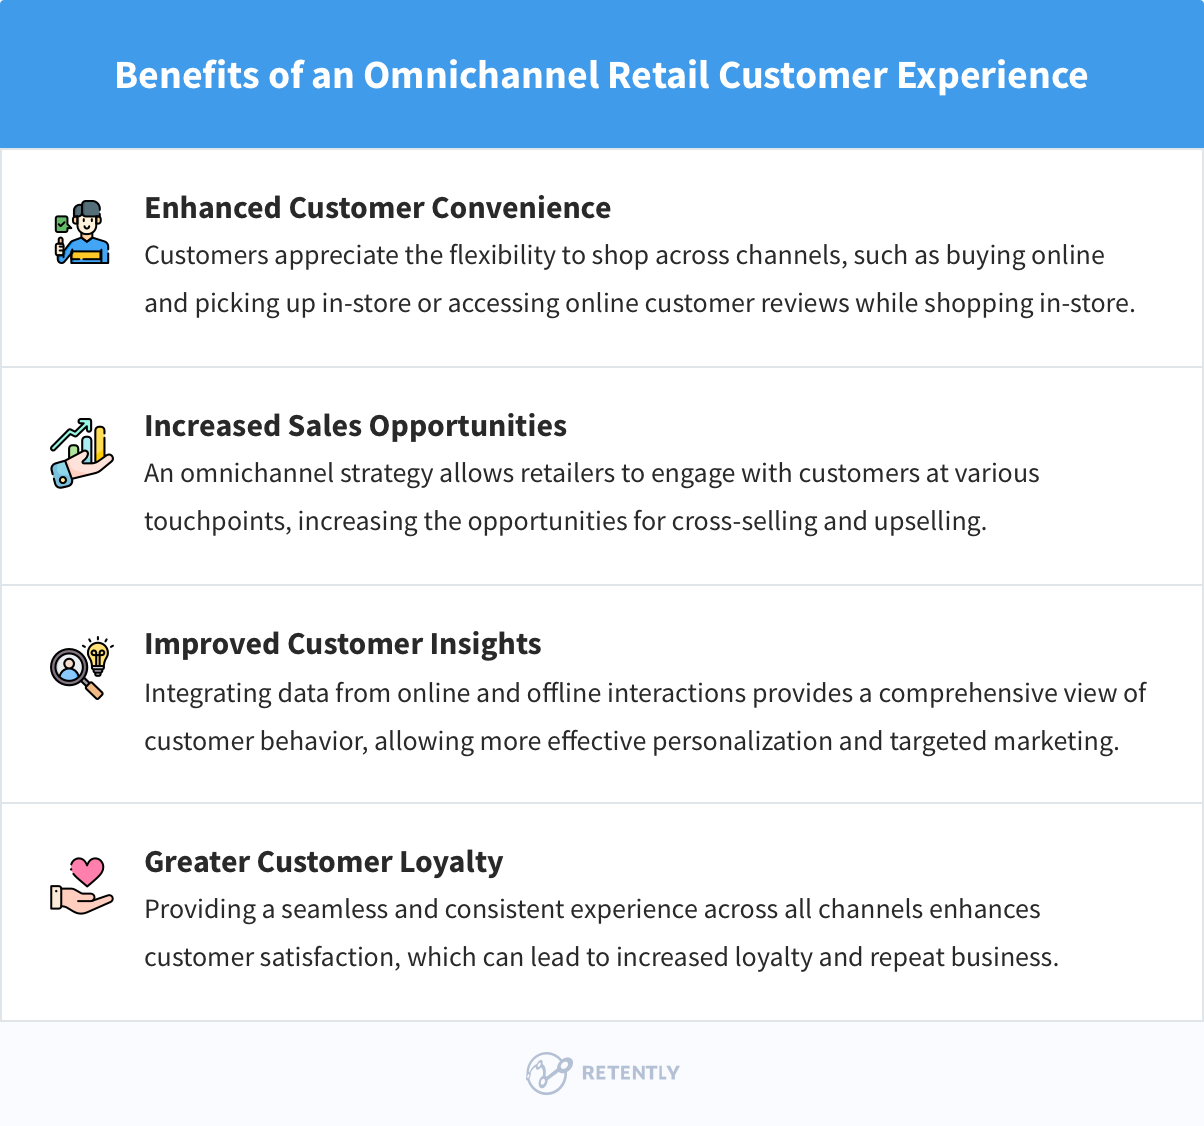 Benefits of an Omnichannel Retail Customer Experience